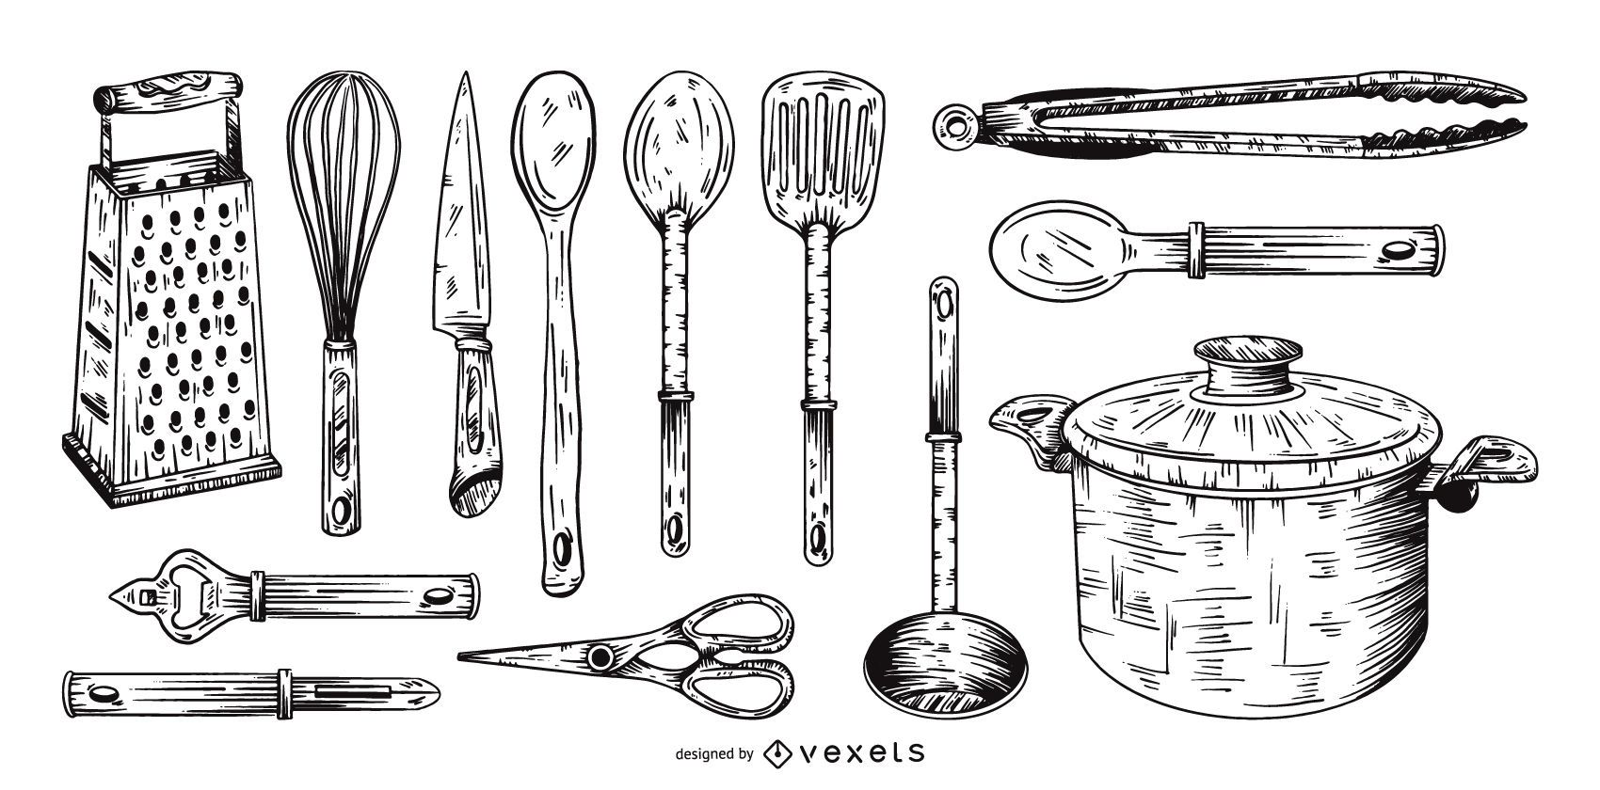 Sticker Kitchen utensils, sketch drawing for your design - PIXERS.US